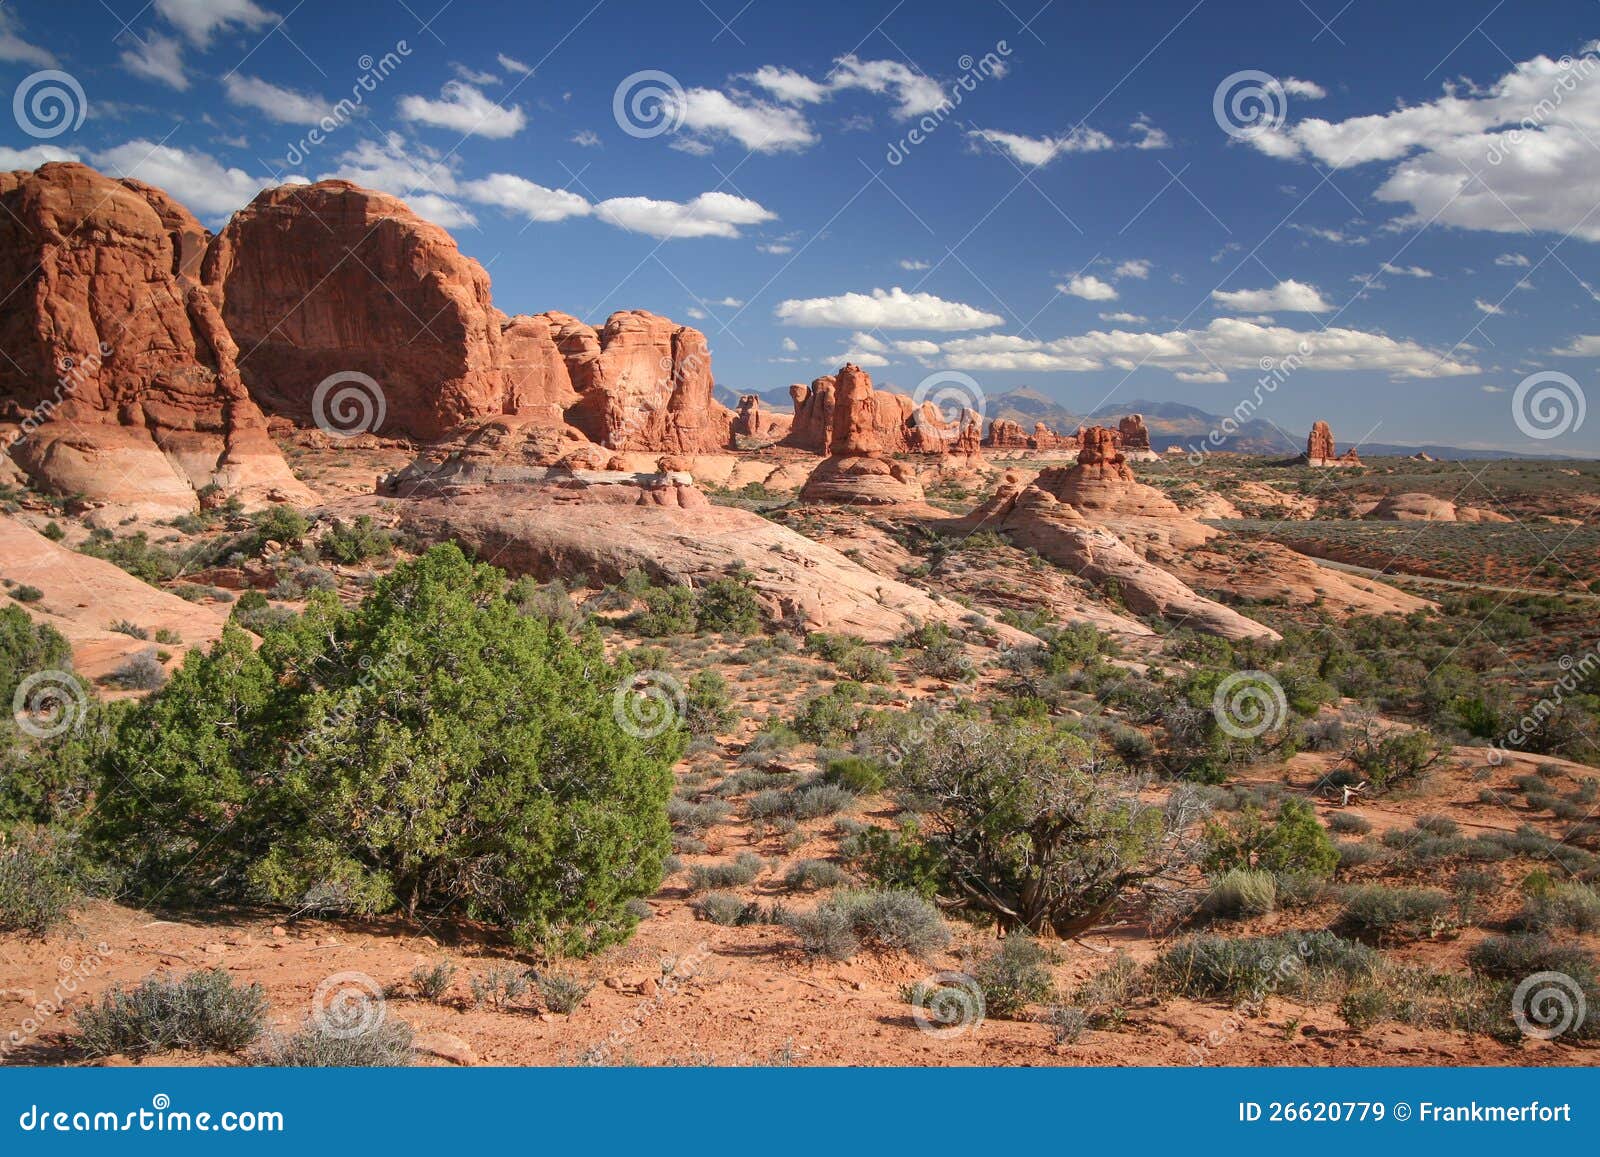 Garden Of Eden At The Arches National Park Royalty Free Stock Images